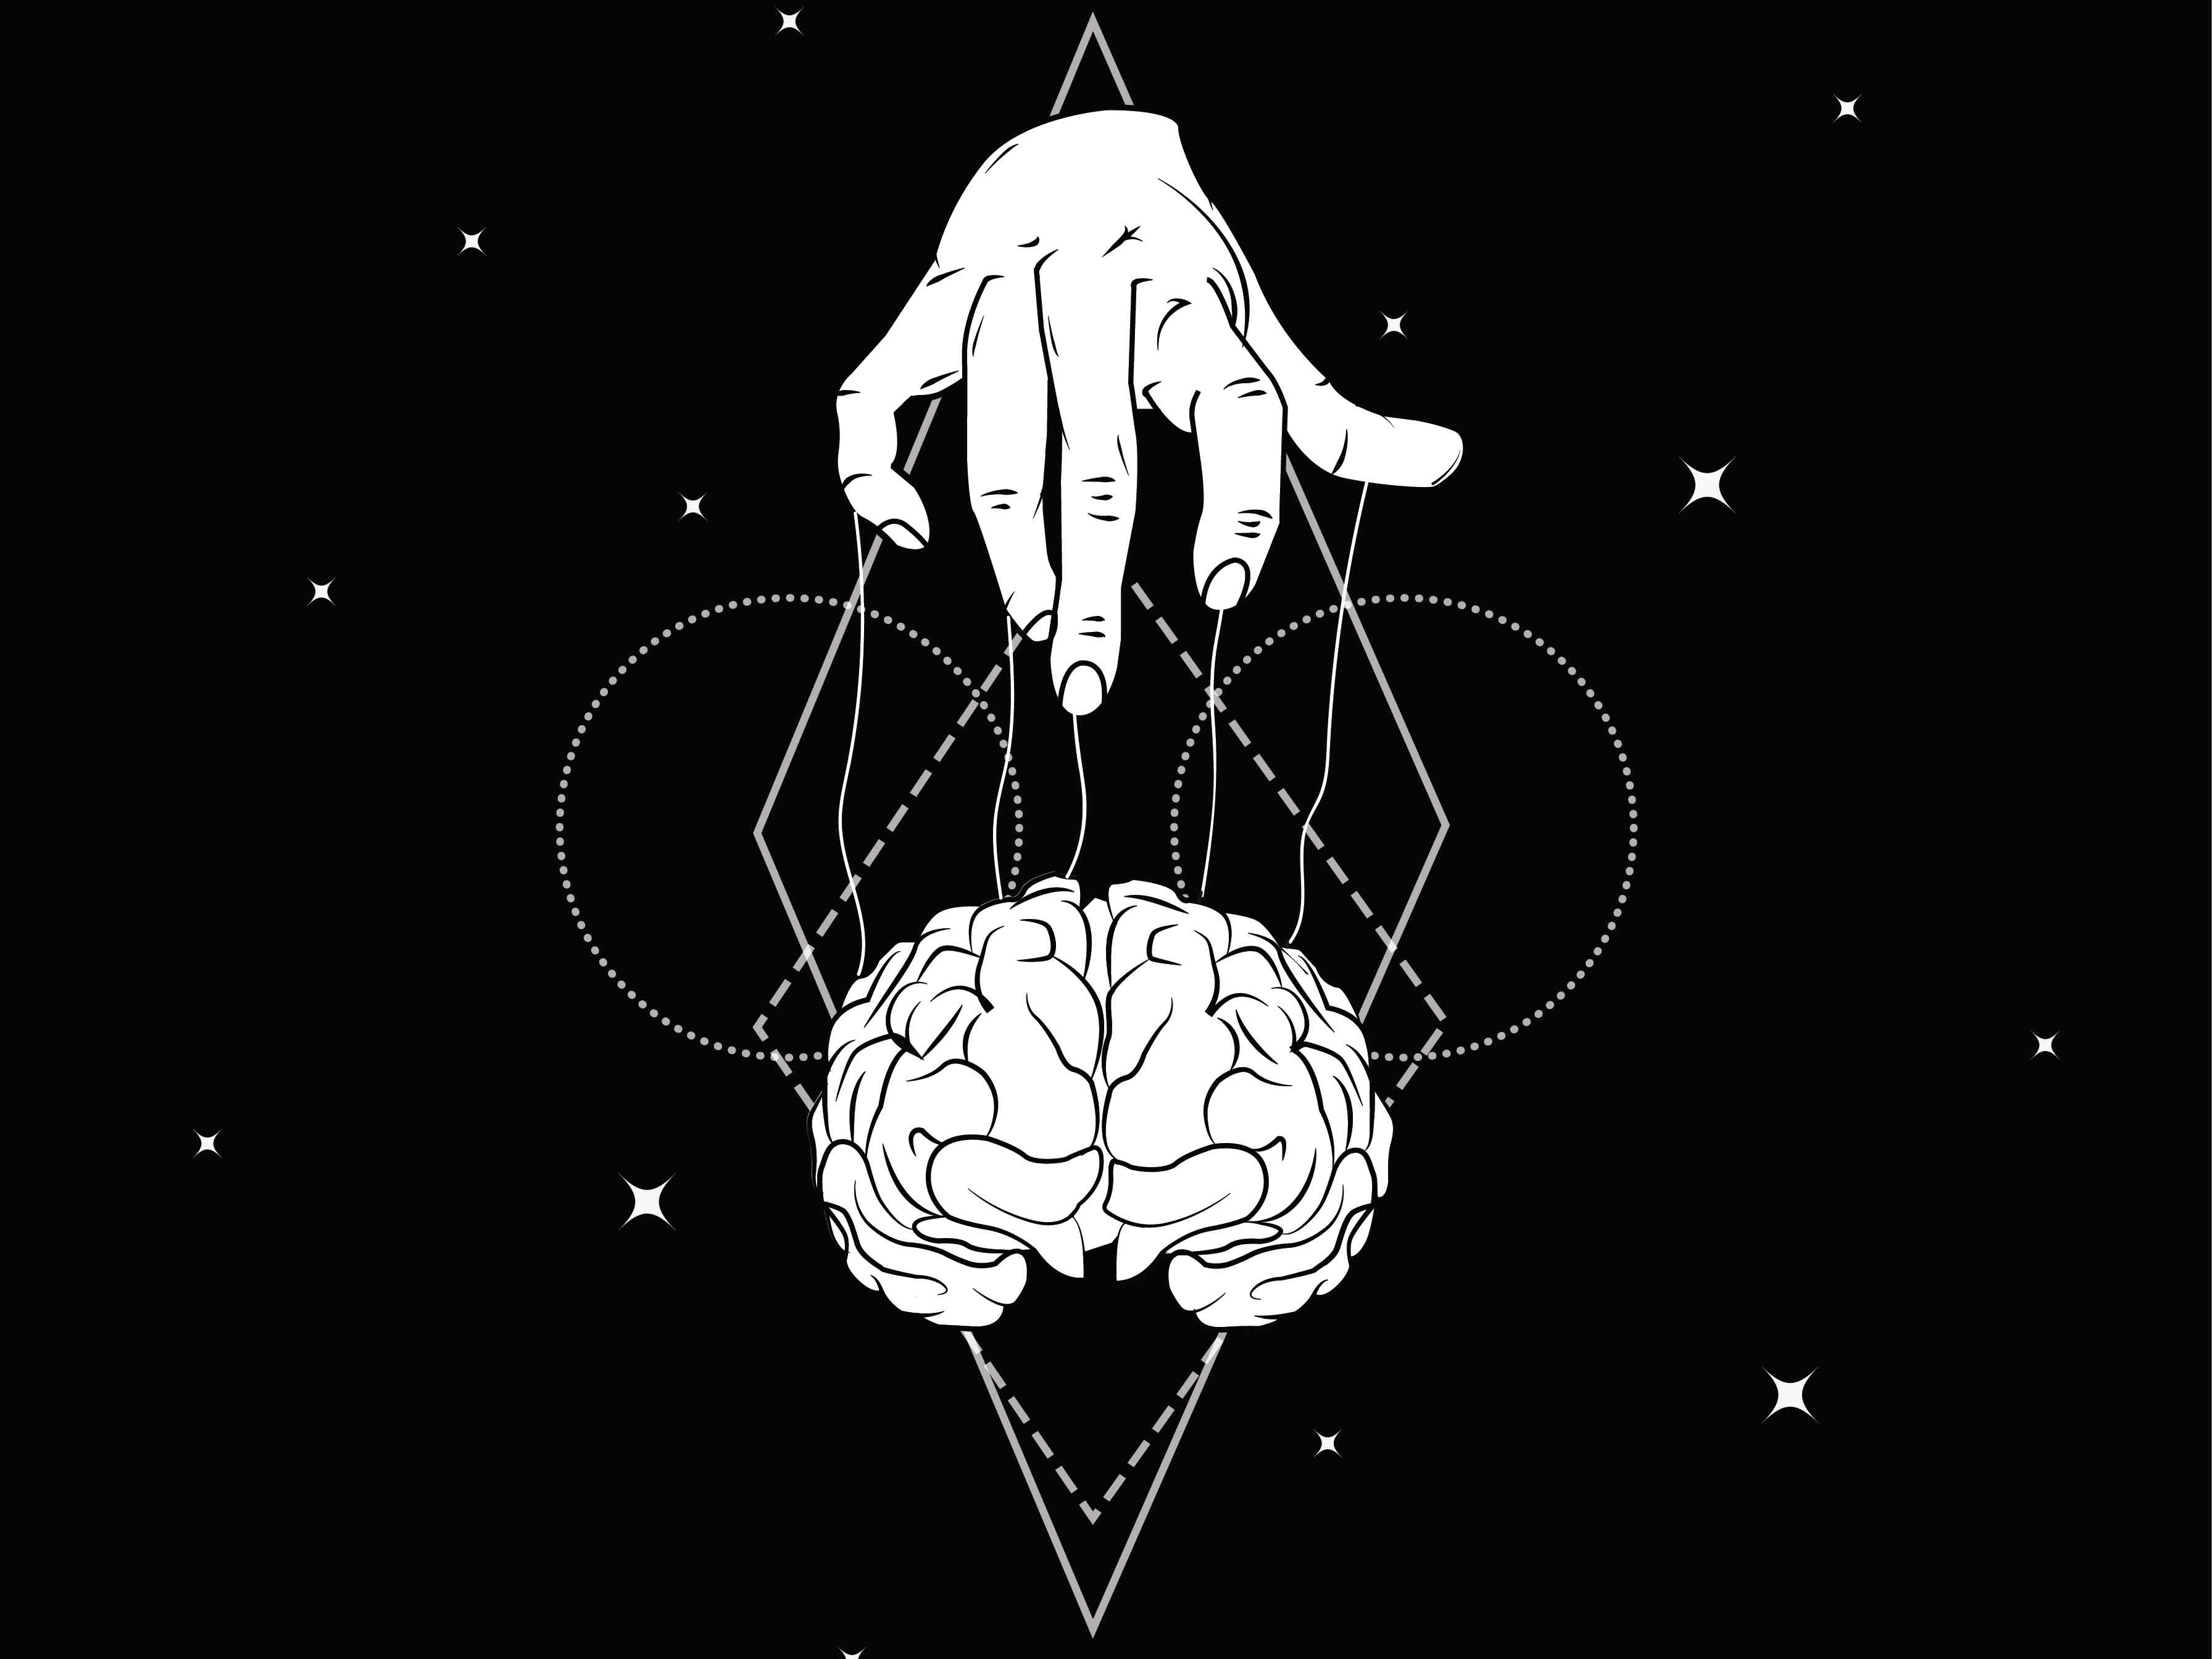  The image is of a hand with strings attached to a brain, with the caption 'Techniques and methods of mind control and suggestion'.